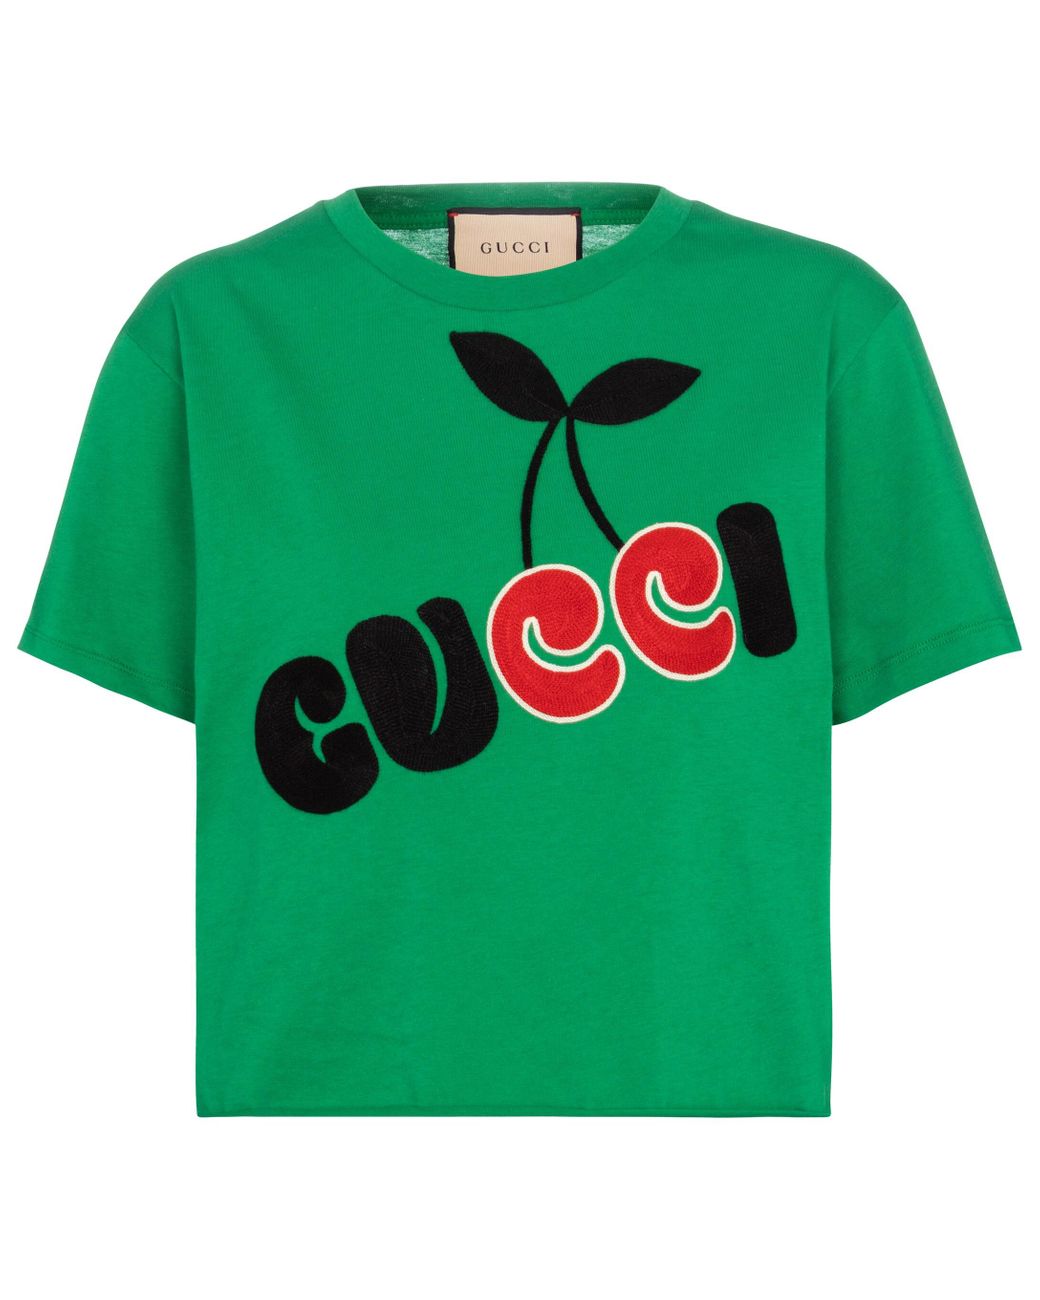 Gucci Embroidered Cotton T-shirt in Green - Lyst